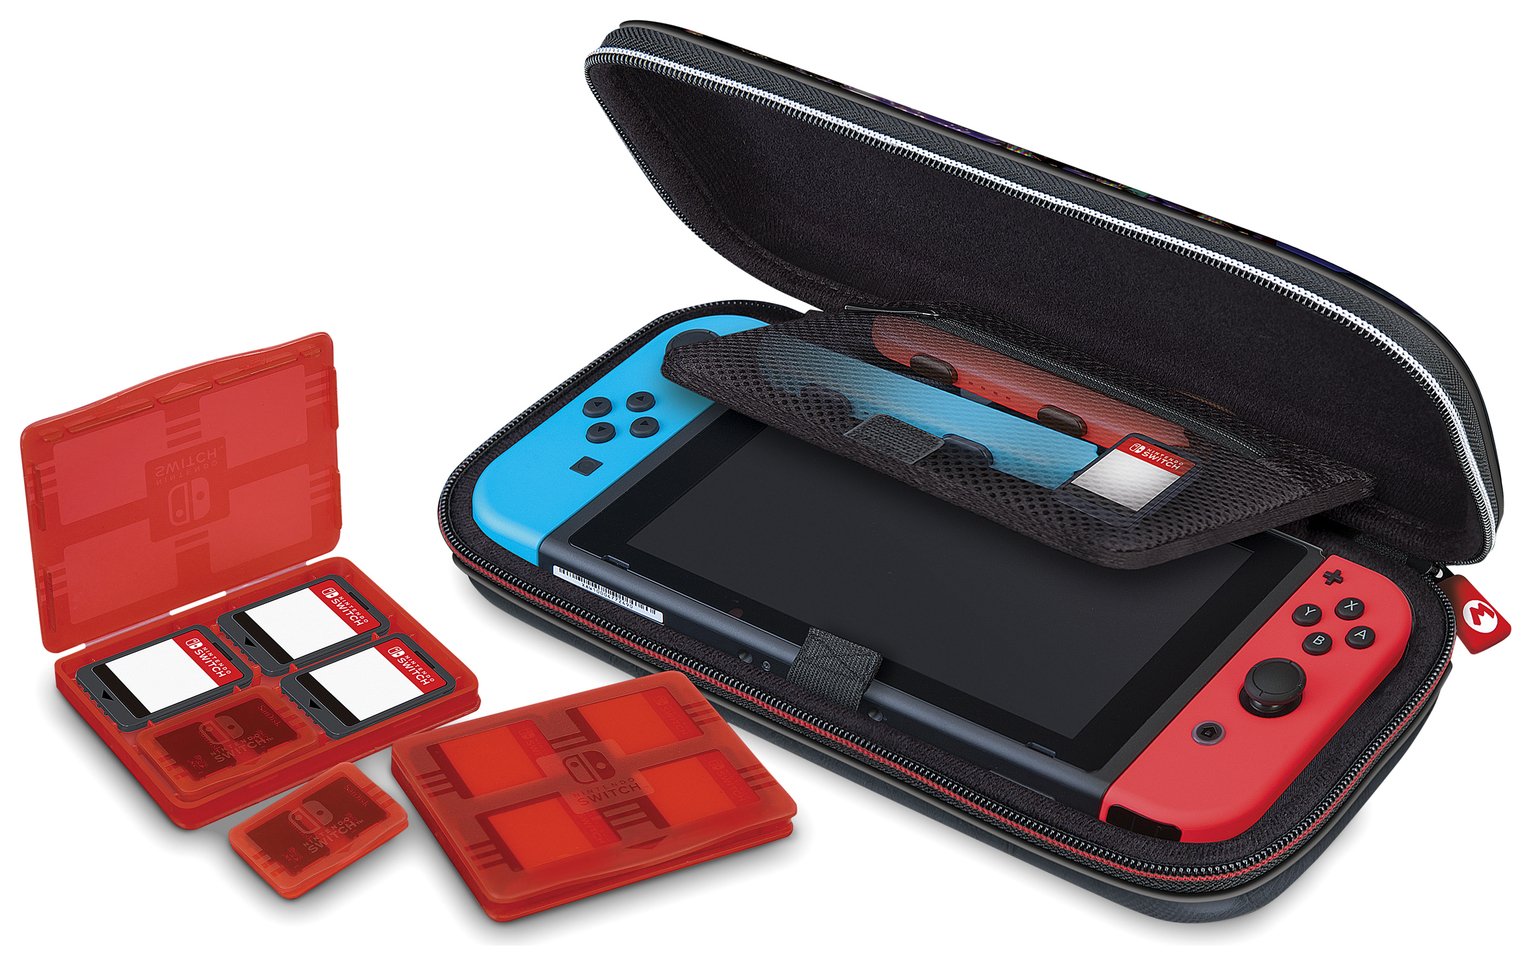 RDS Mario Kart Nintendo Switch Case Review